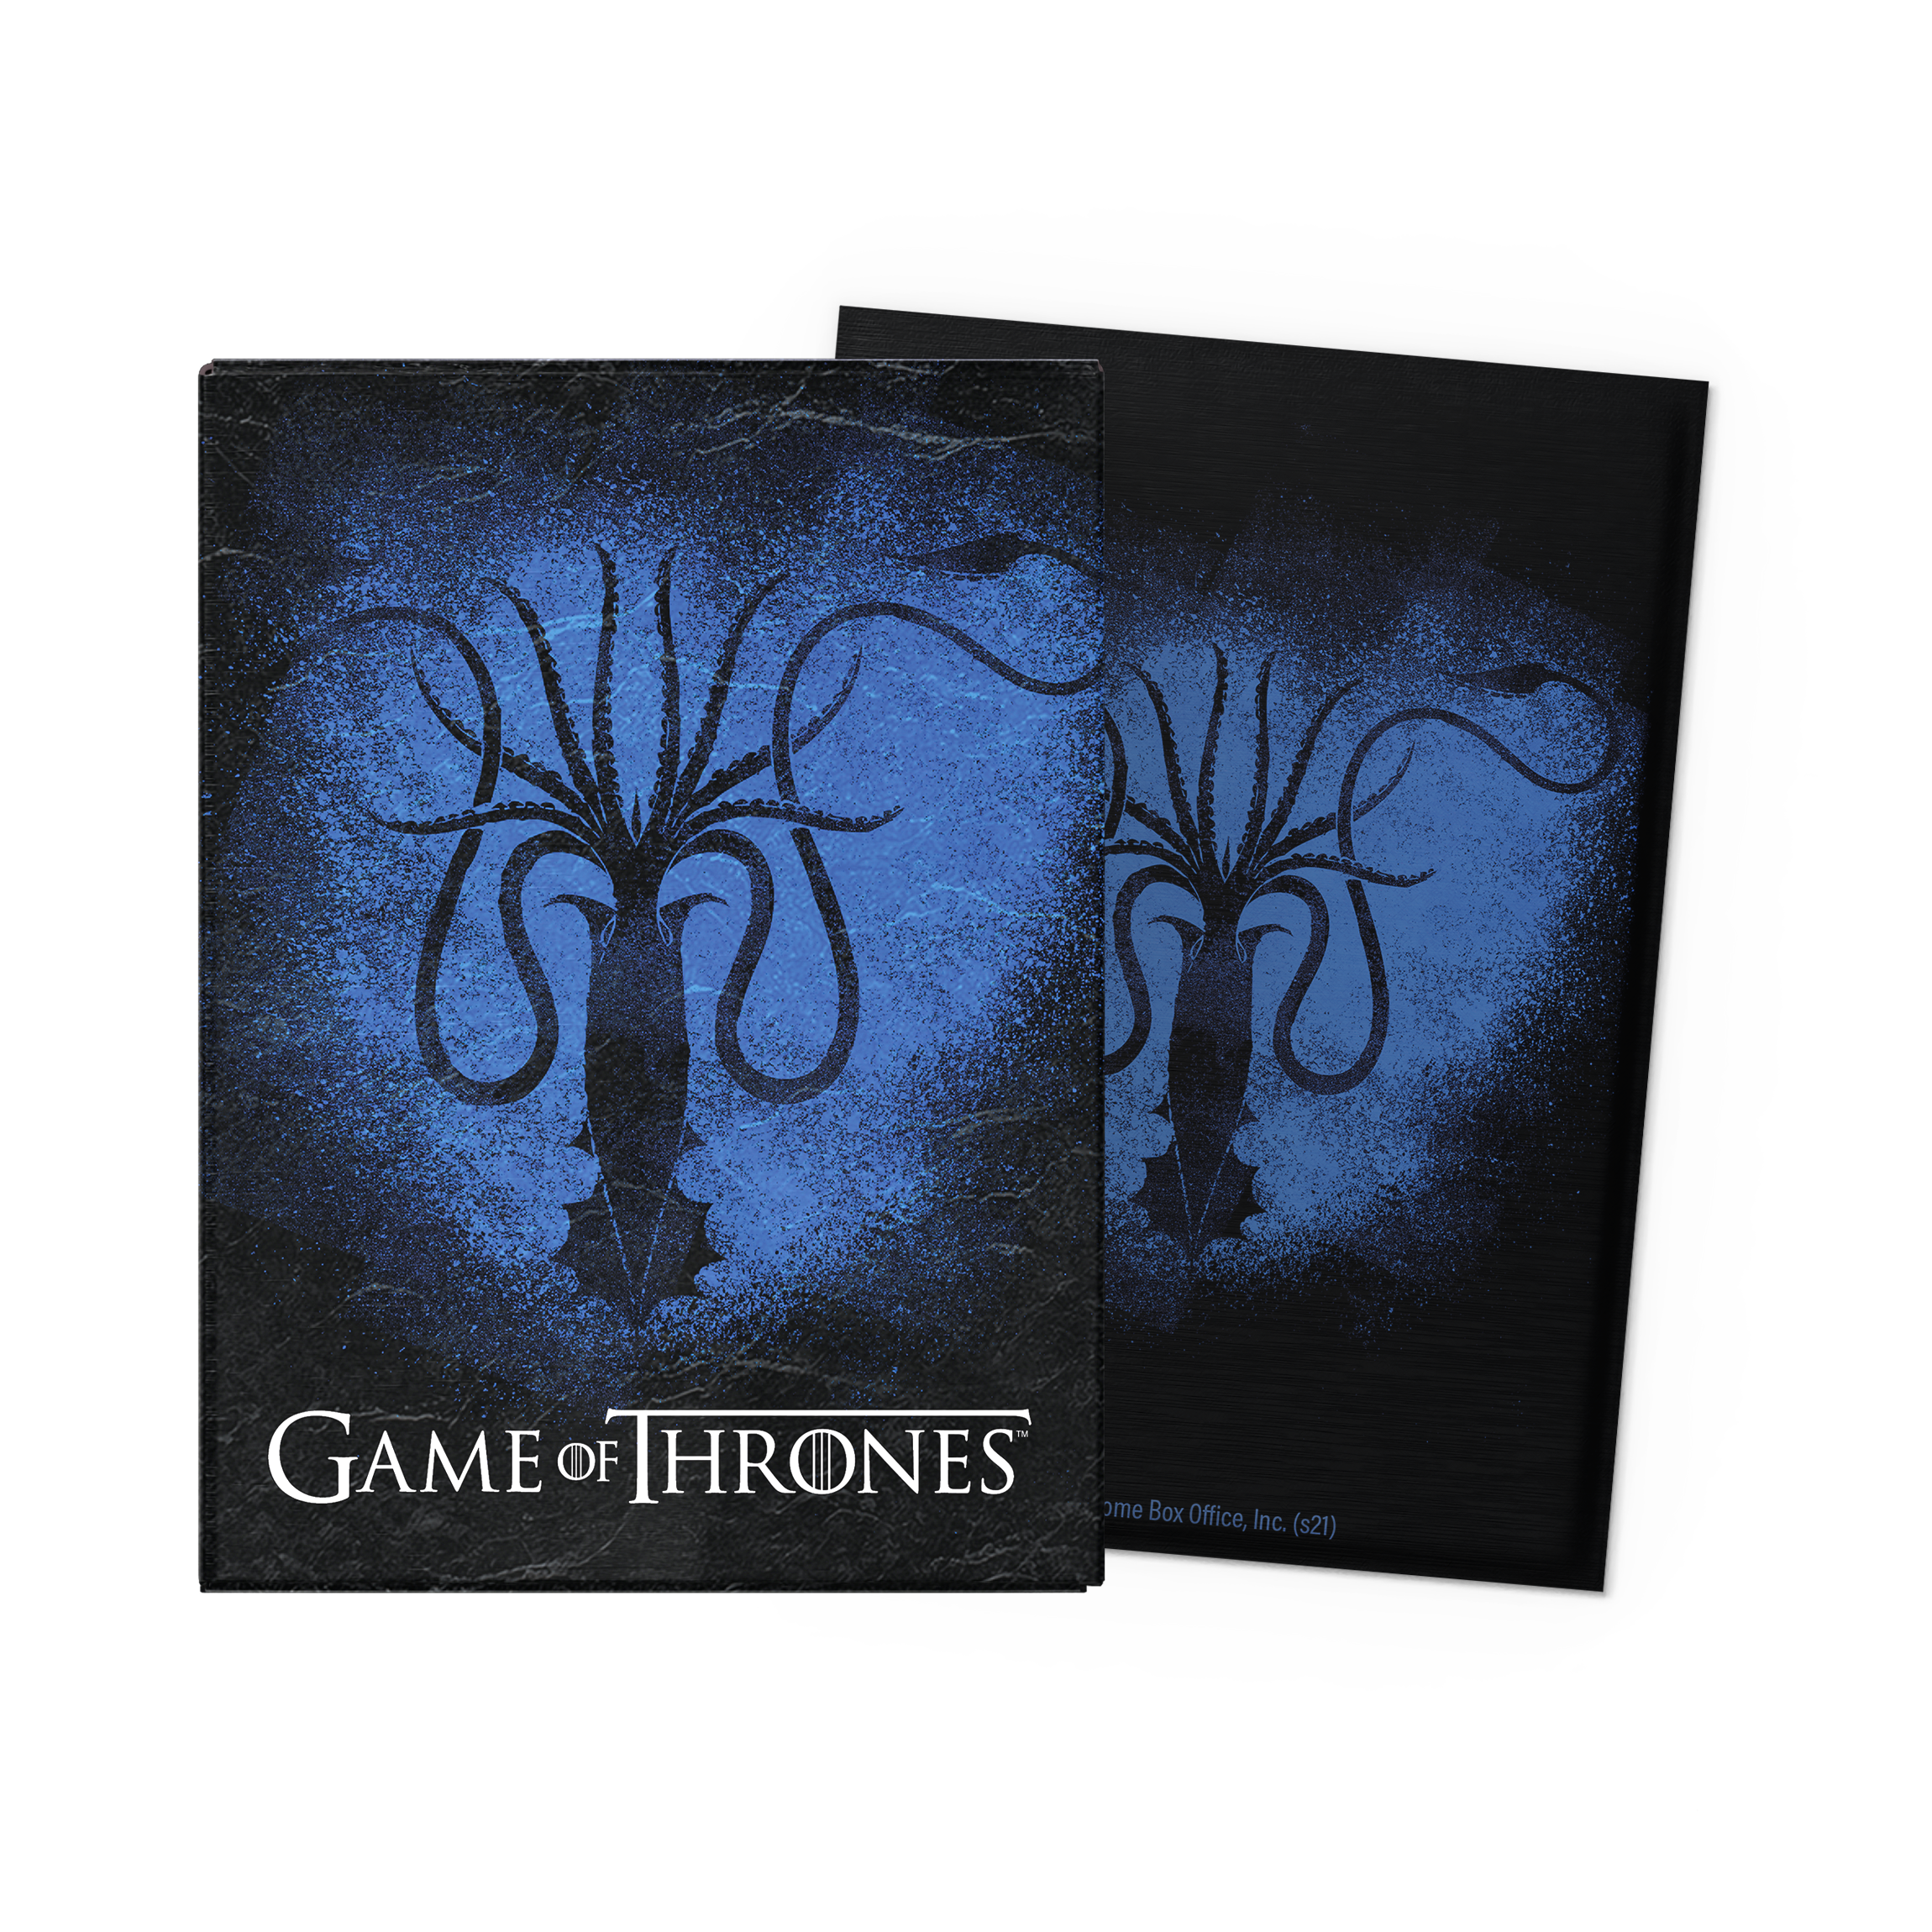 Dragon Shield Card Sleeves – Brushed Art Game of Thrones: House Greyjoy  Standard Size 100CT - MGT Card Sleeves are Smooth & Tough - Compatible with